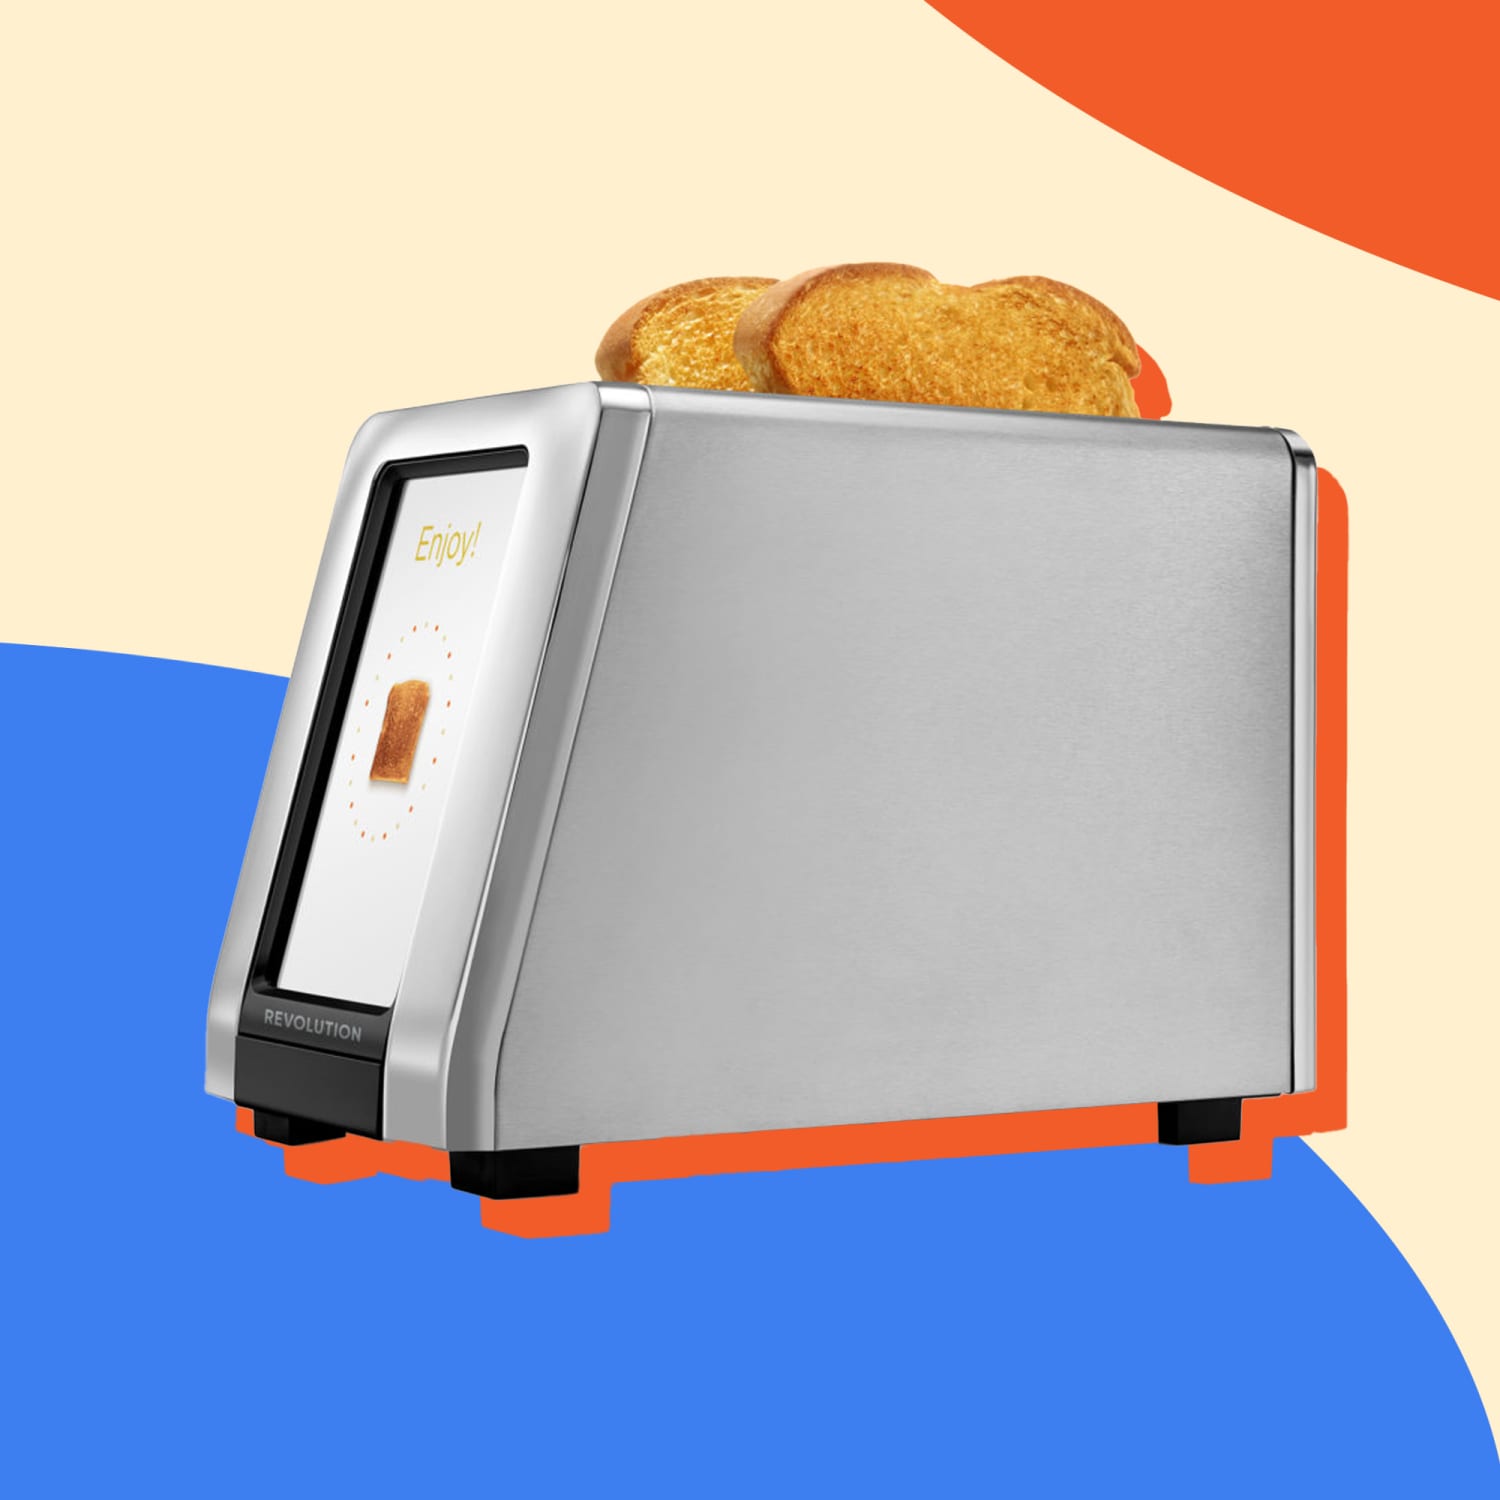 Revolution InstaGLO R180 Stainless Steel Toaster + Reviews